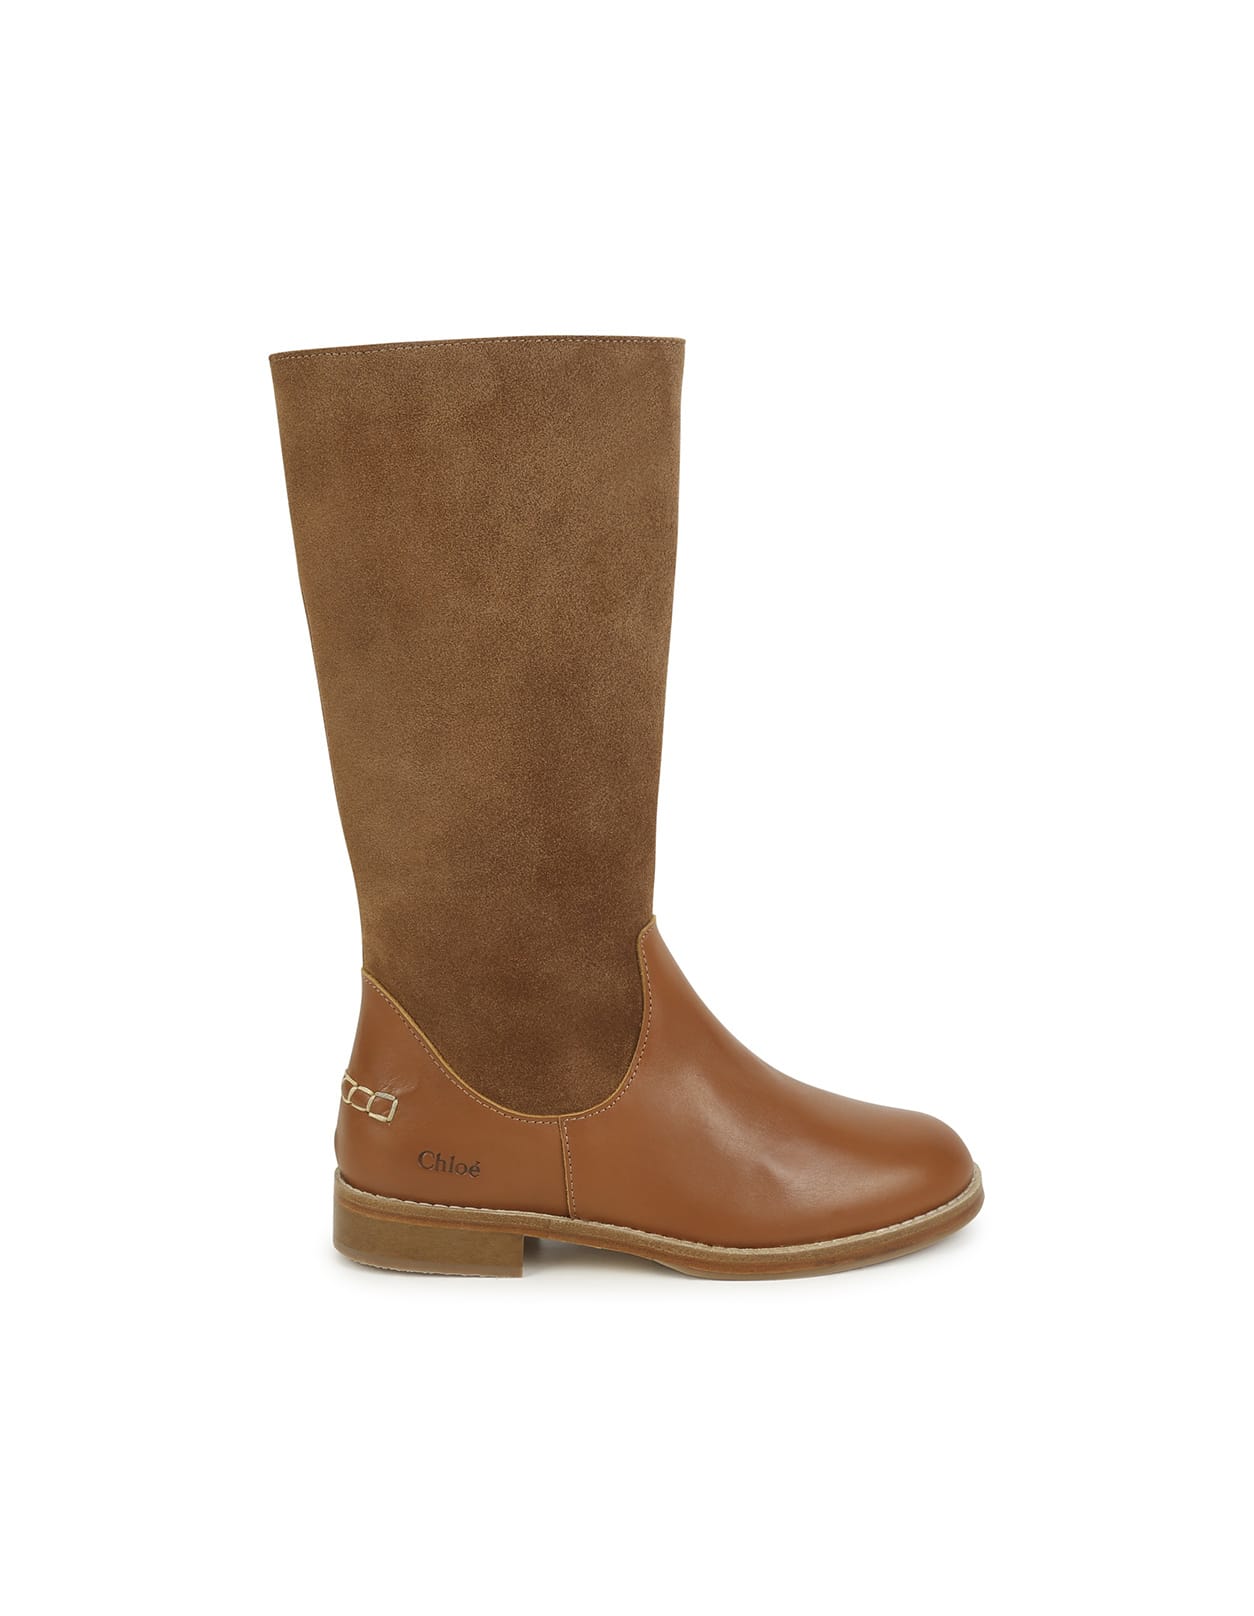 CHLOÉ TAN LEATHER AND SUEDE BOOT WITH LOGO